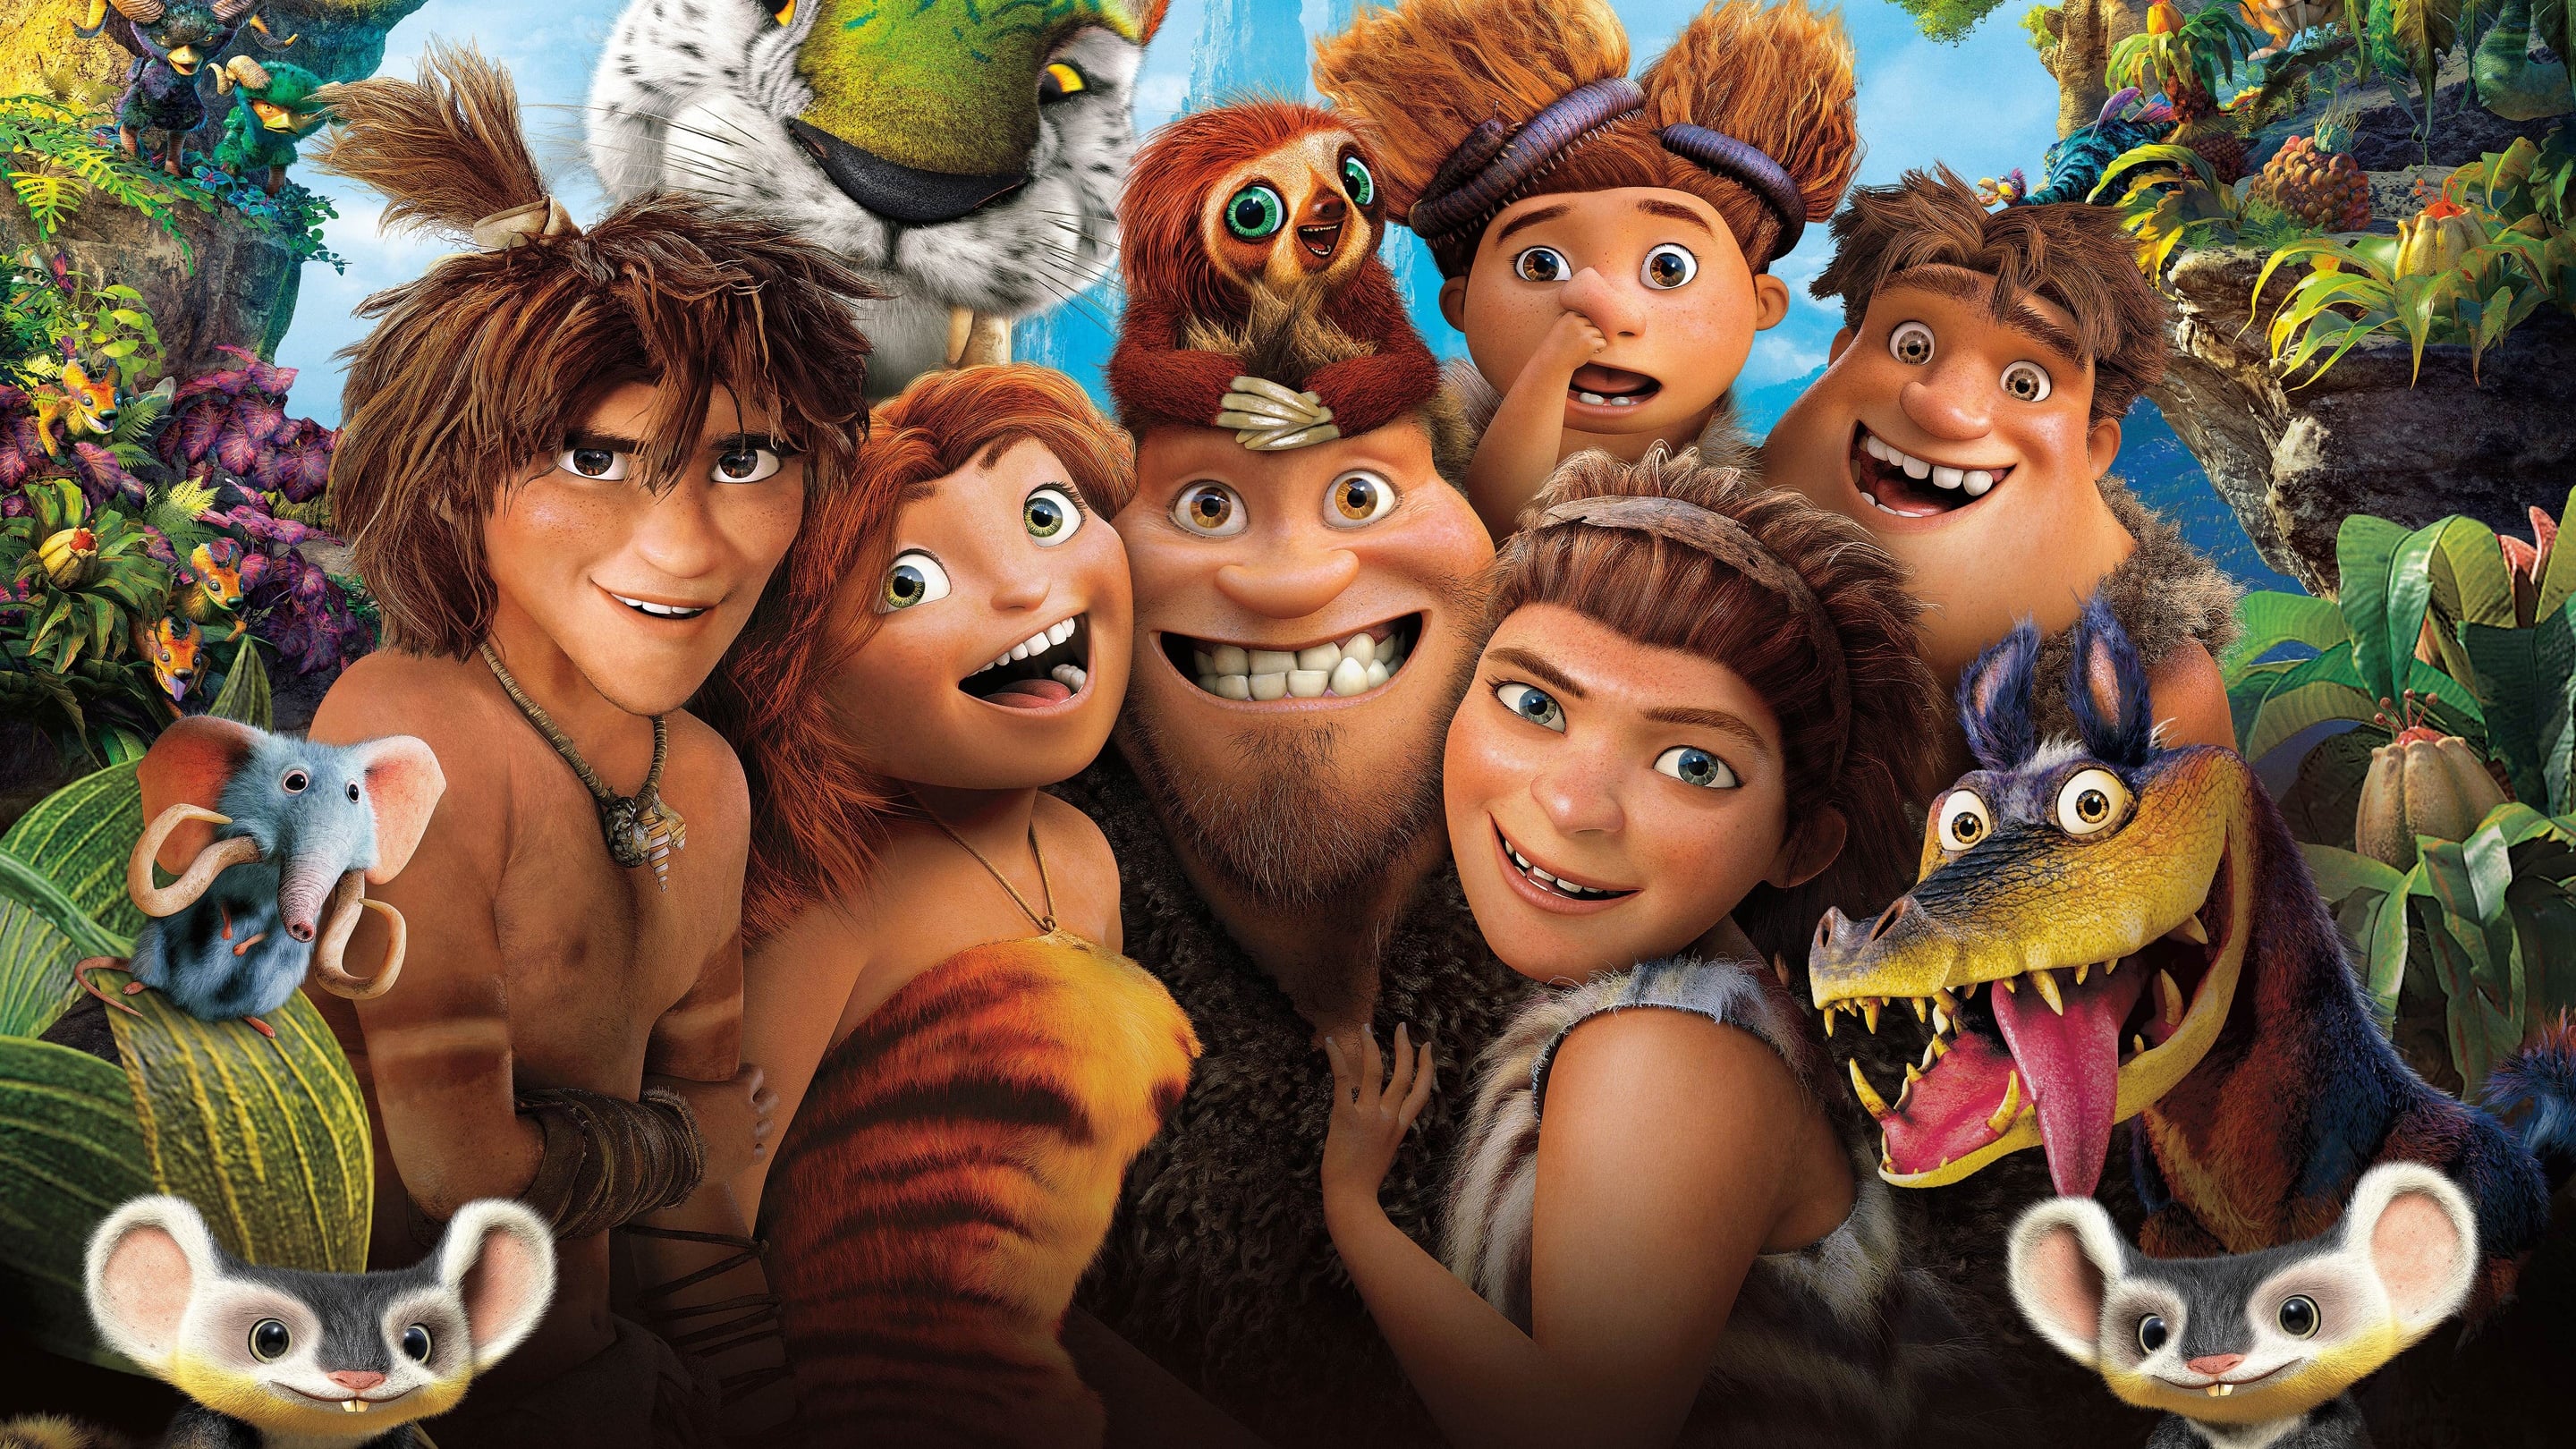 The Croods full movie online where to watch? 